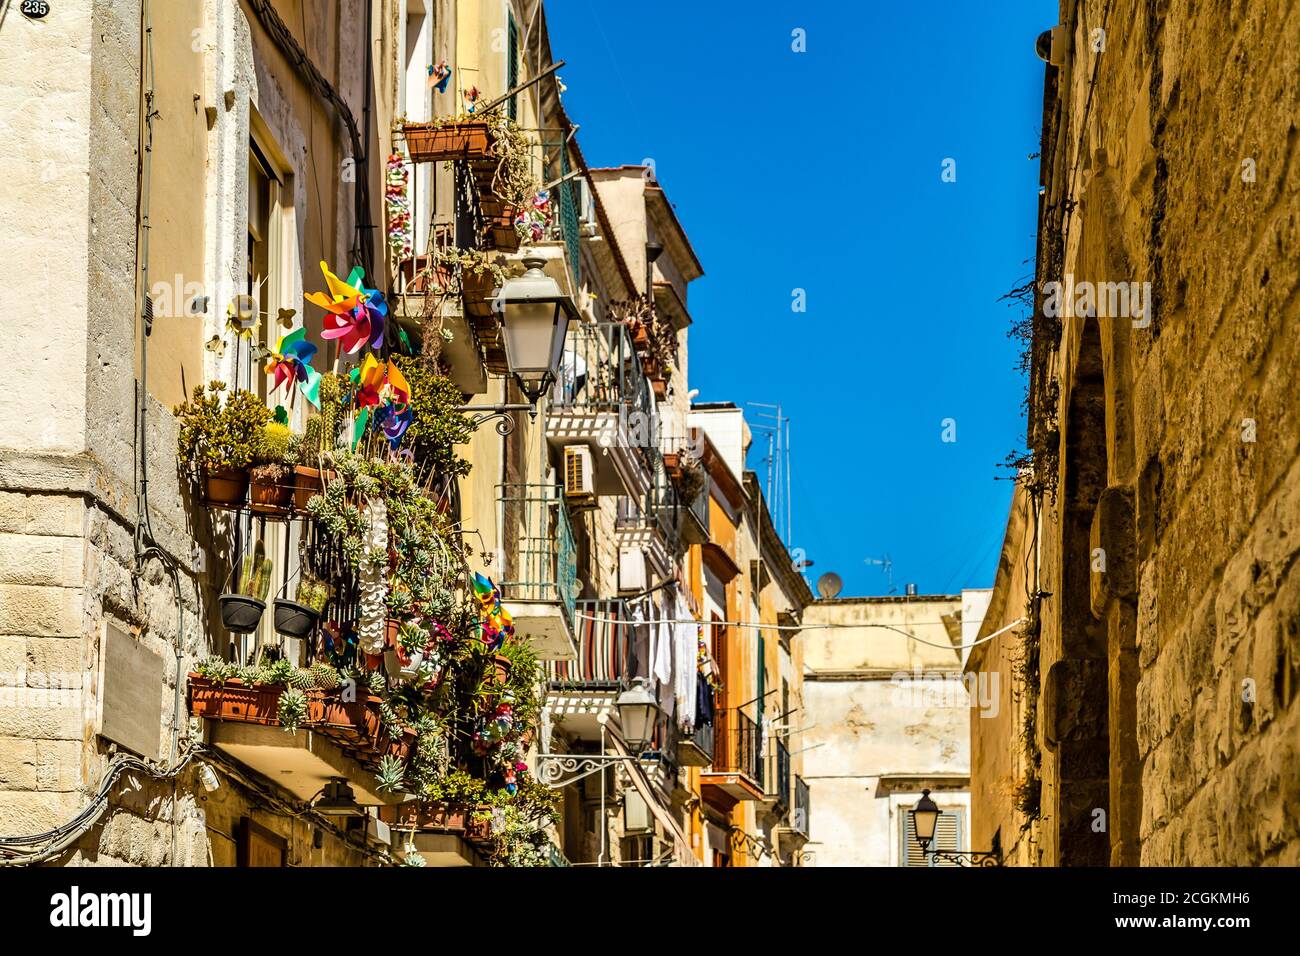 typical balconies of town in the Southern Italy Stock Photo